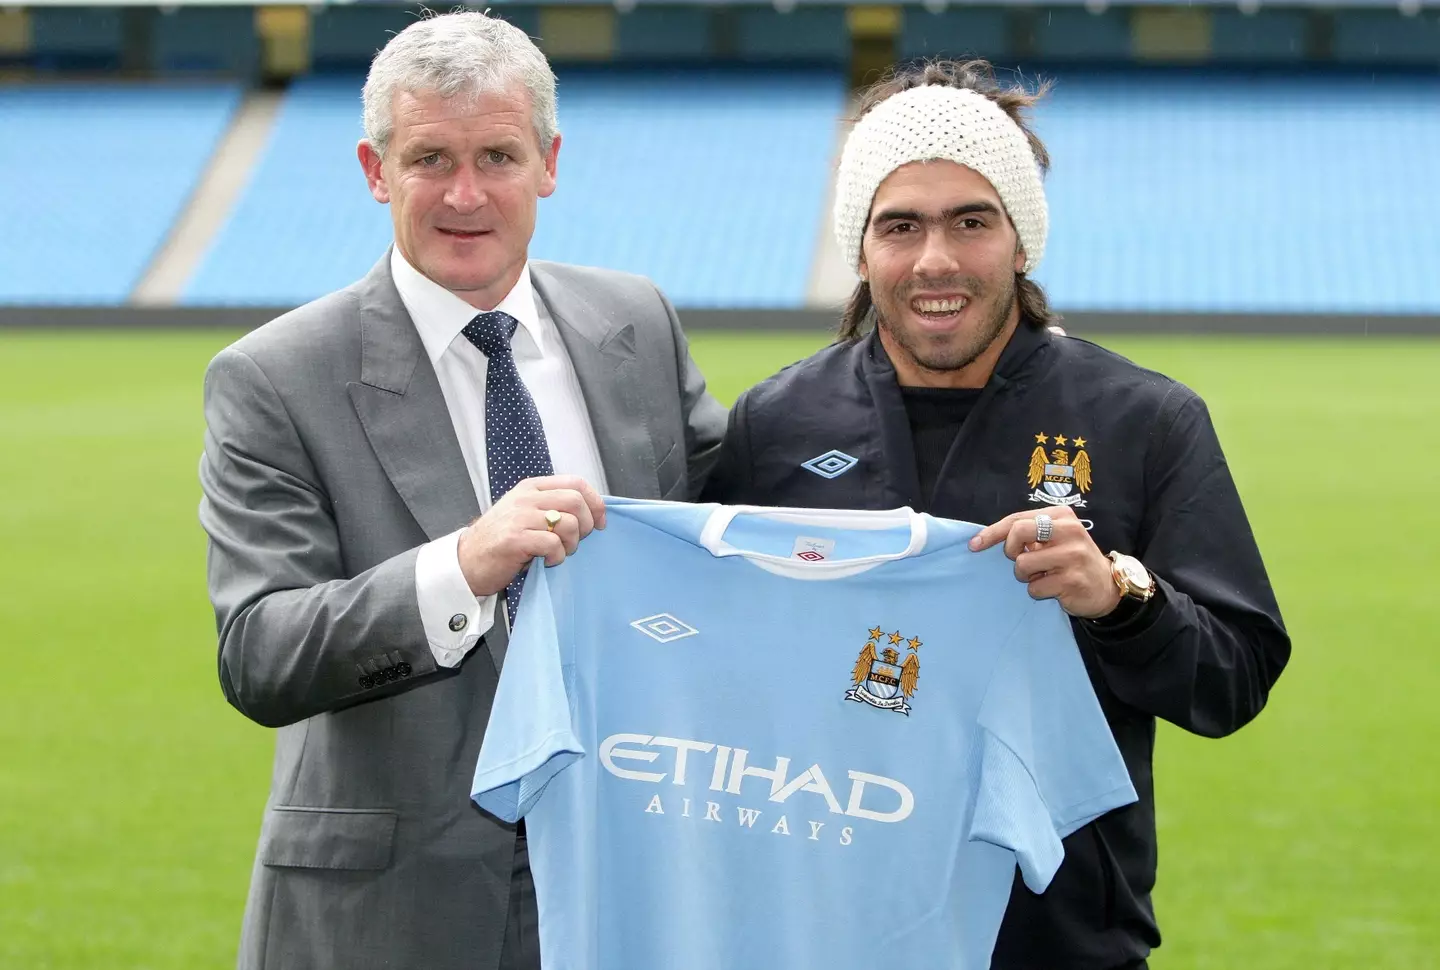 Carlos Tevez was the last high-profile player to swap United for City (Image: PA)